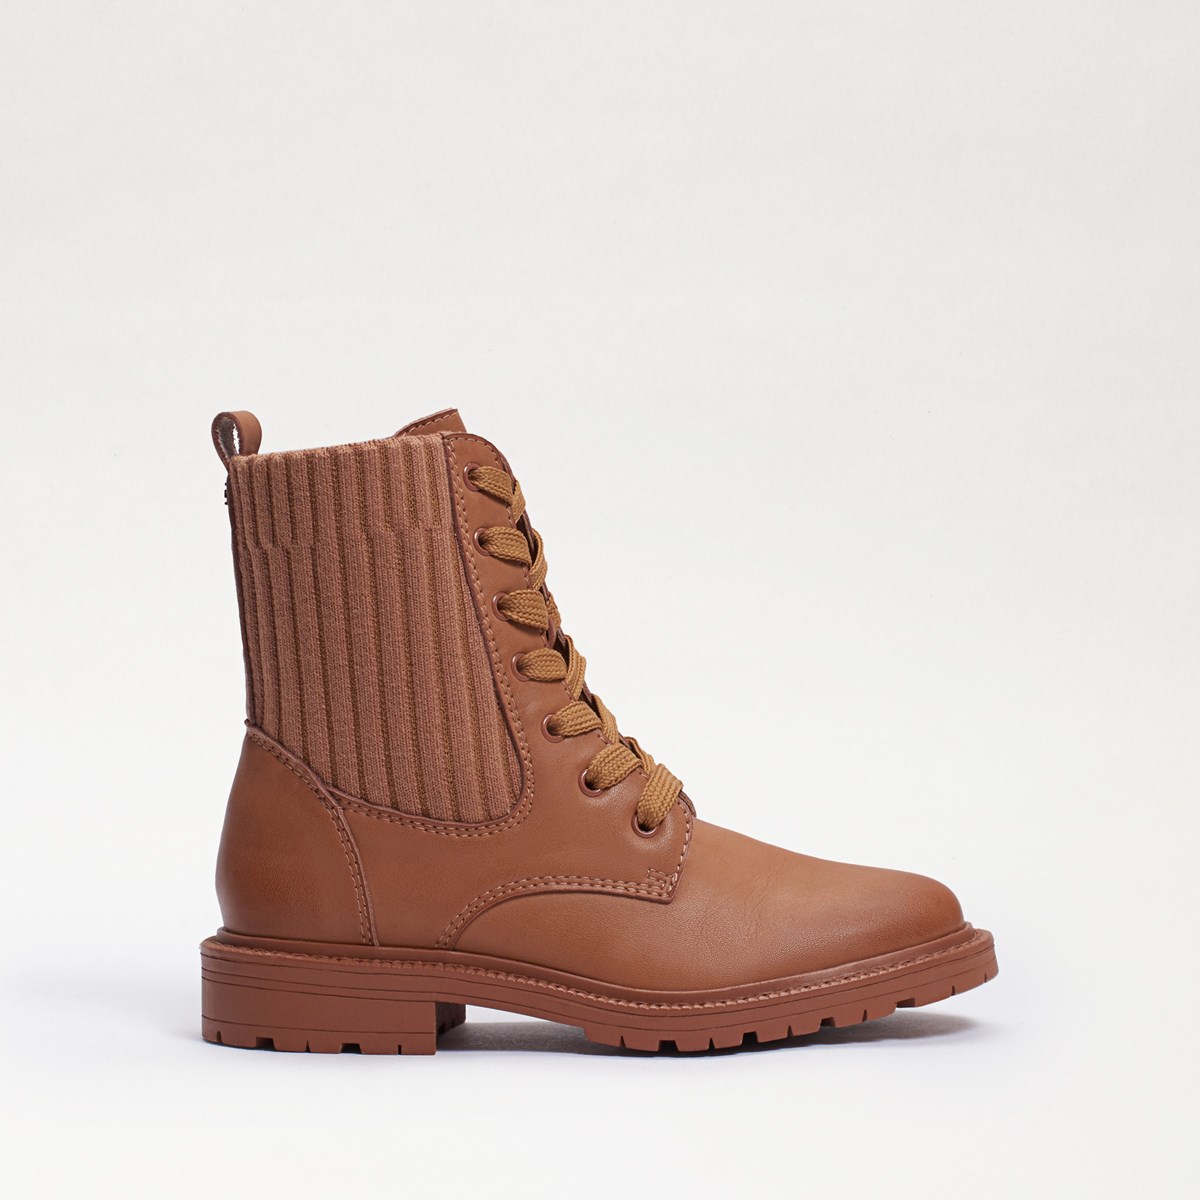 Sam Edelman Lydell Kids Combat Boot | Girls' Boots and Booties